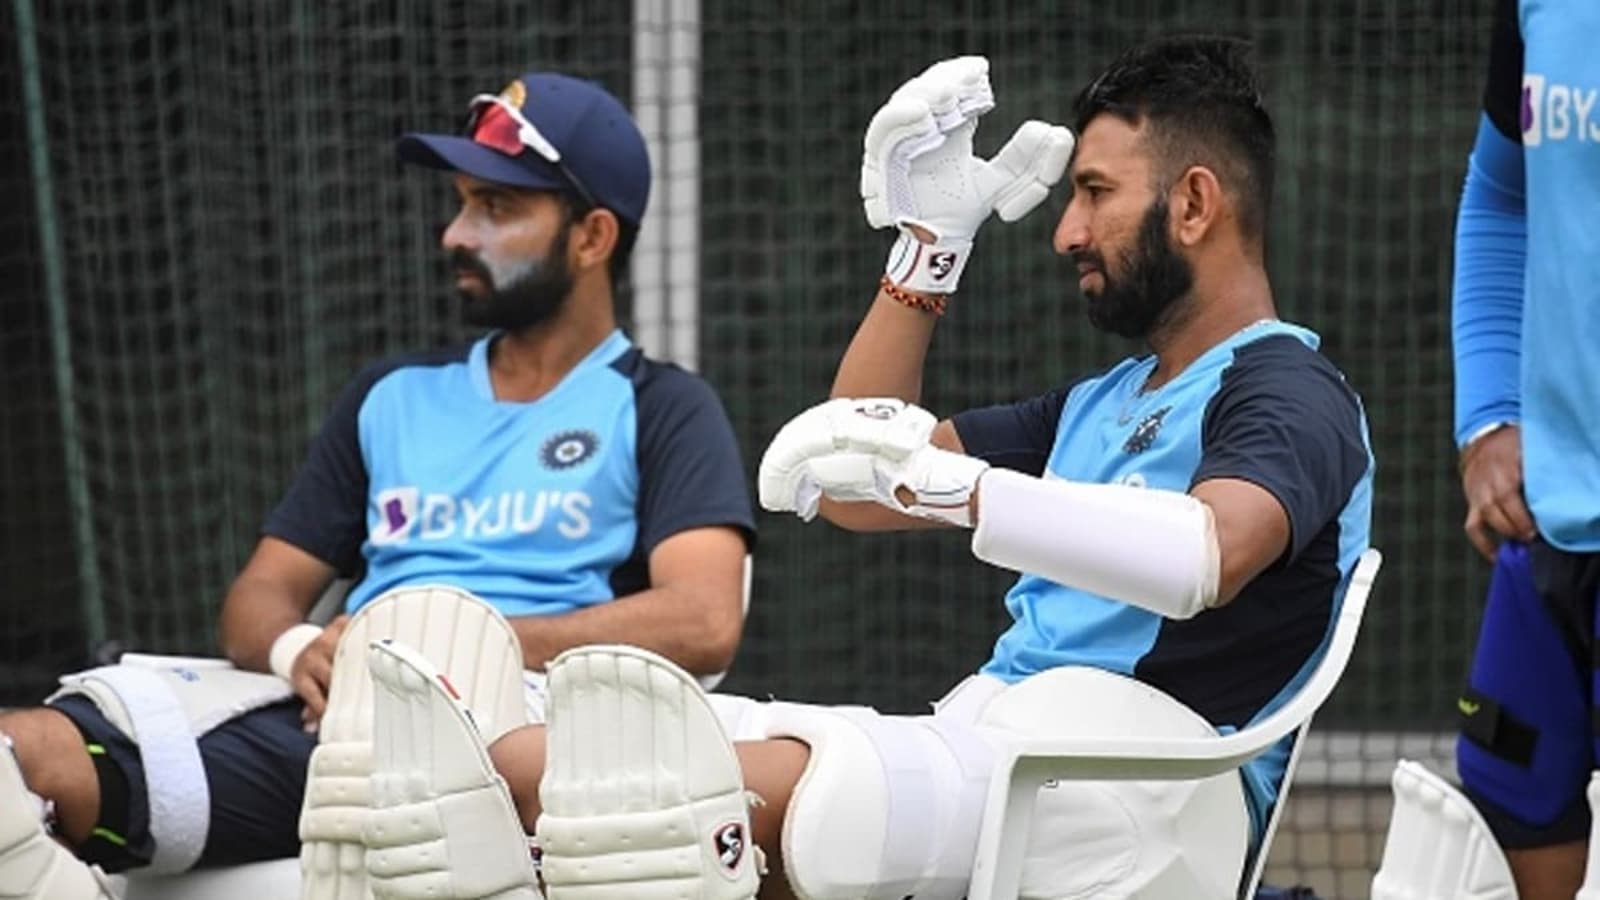 No score is bigger than friendship&#39;: Fans brutally troll Pujara and Rahane  after yet another flop show | Cricket - Hindustan Times